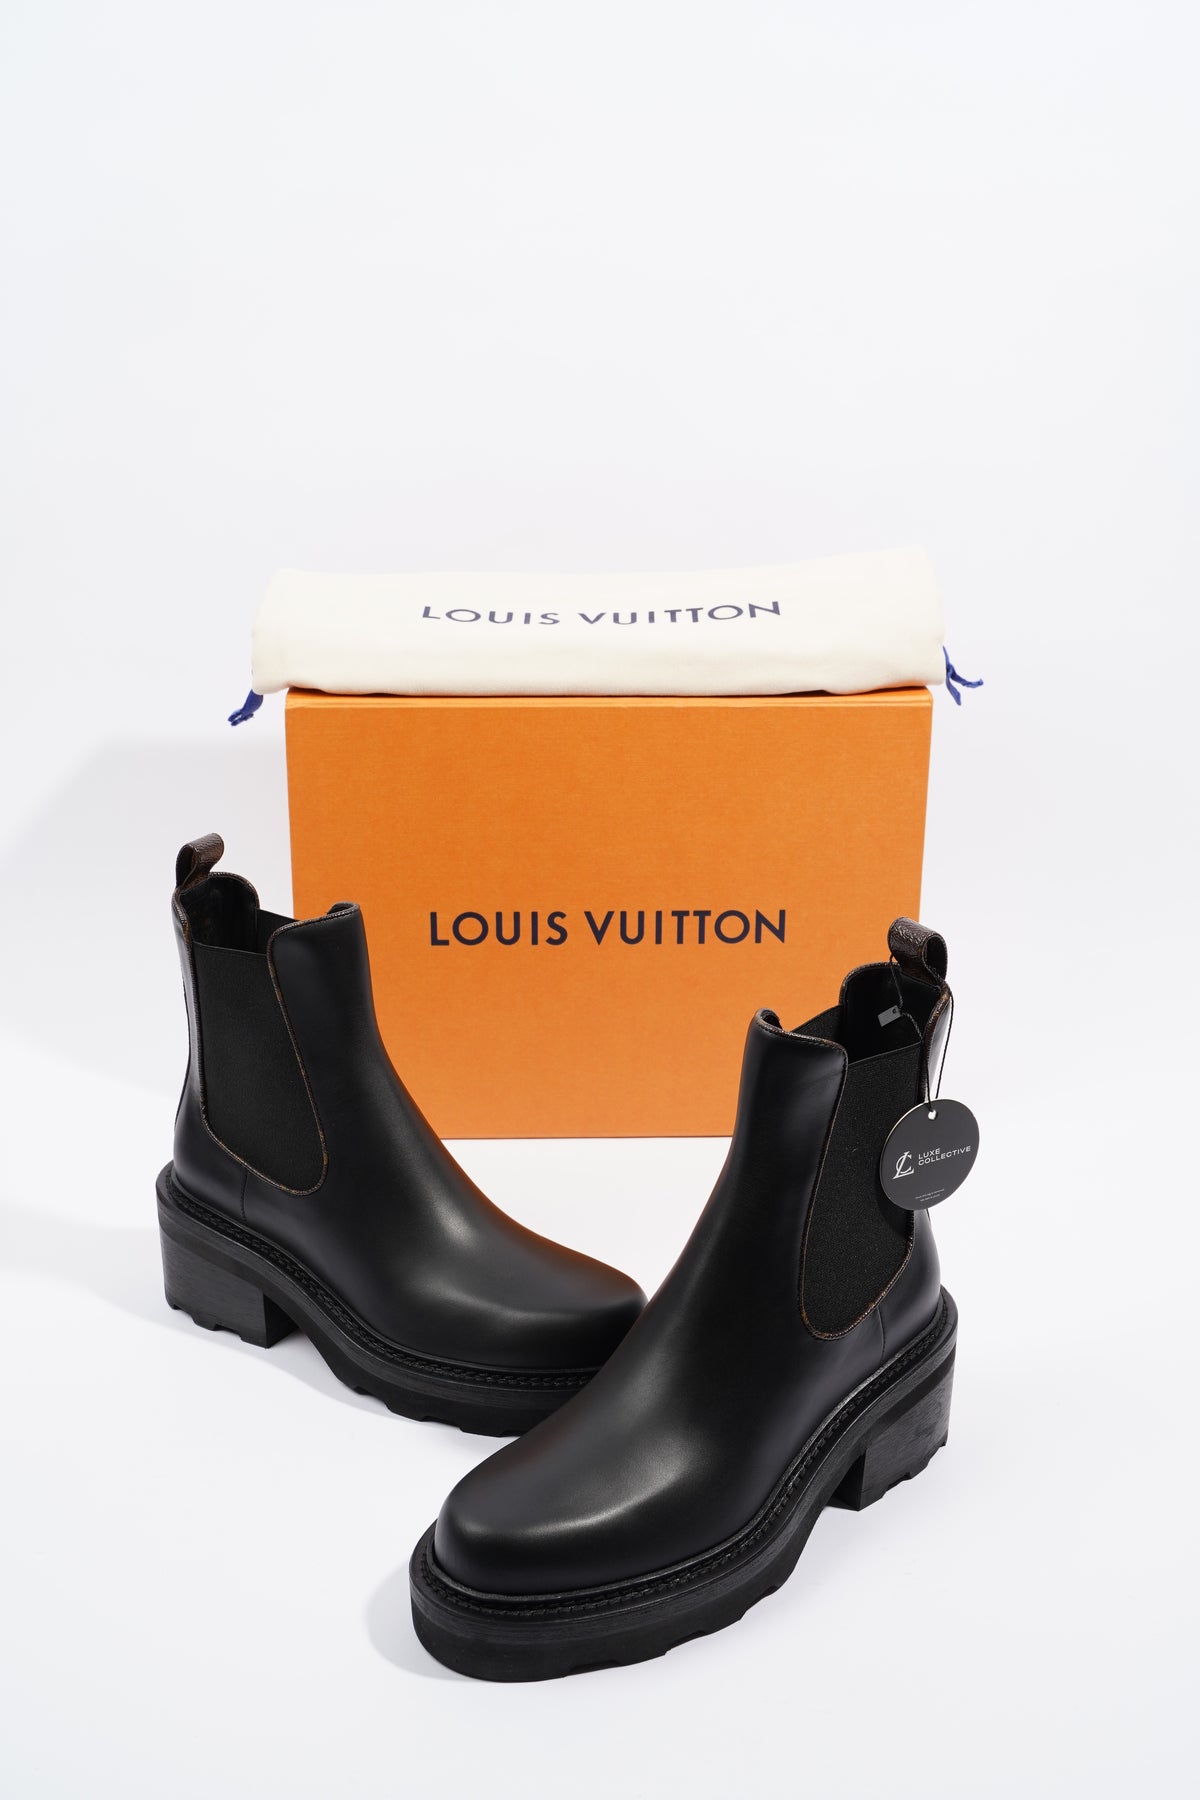 Louis Vuitton Womens Beaubourg Ankle Boot Black Leather EU 38 / UK